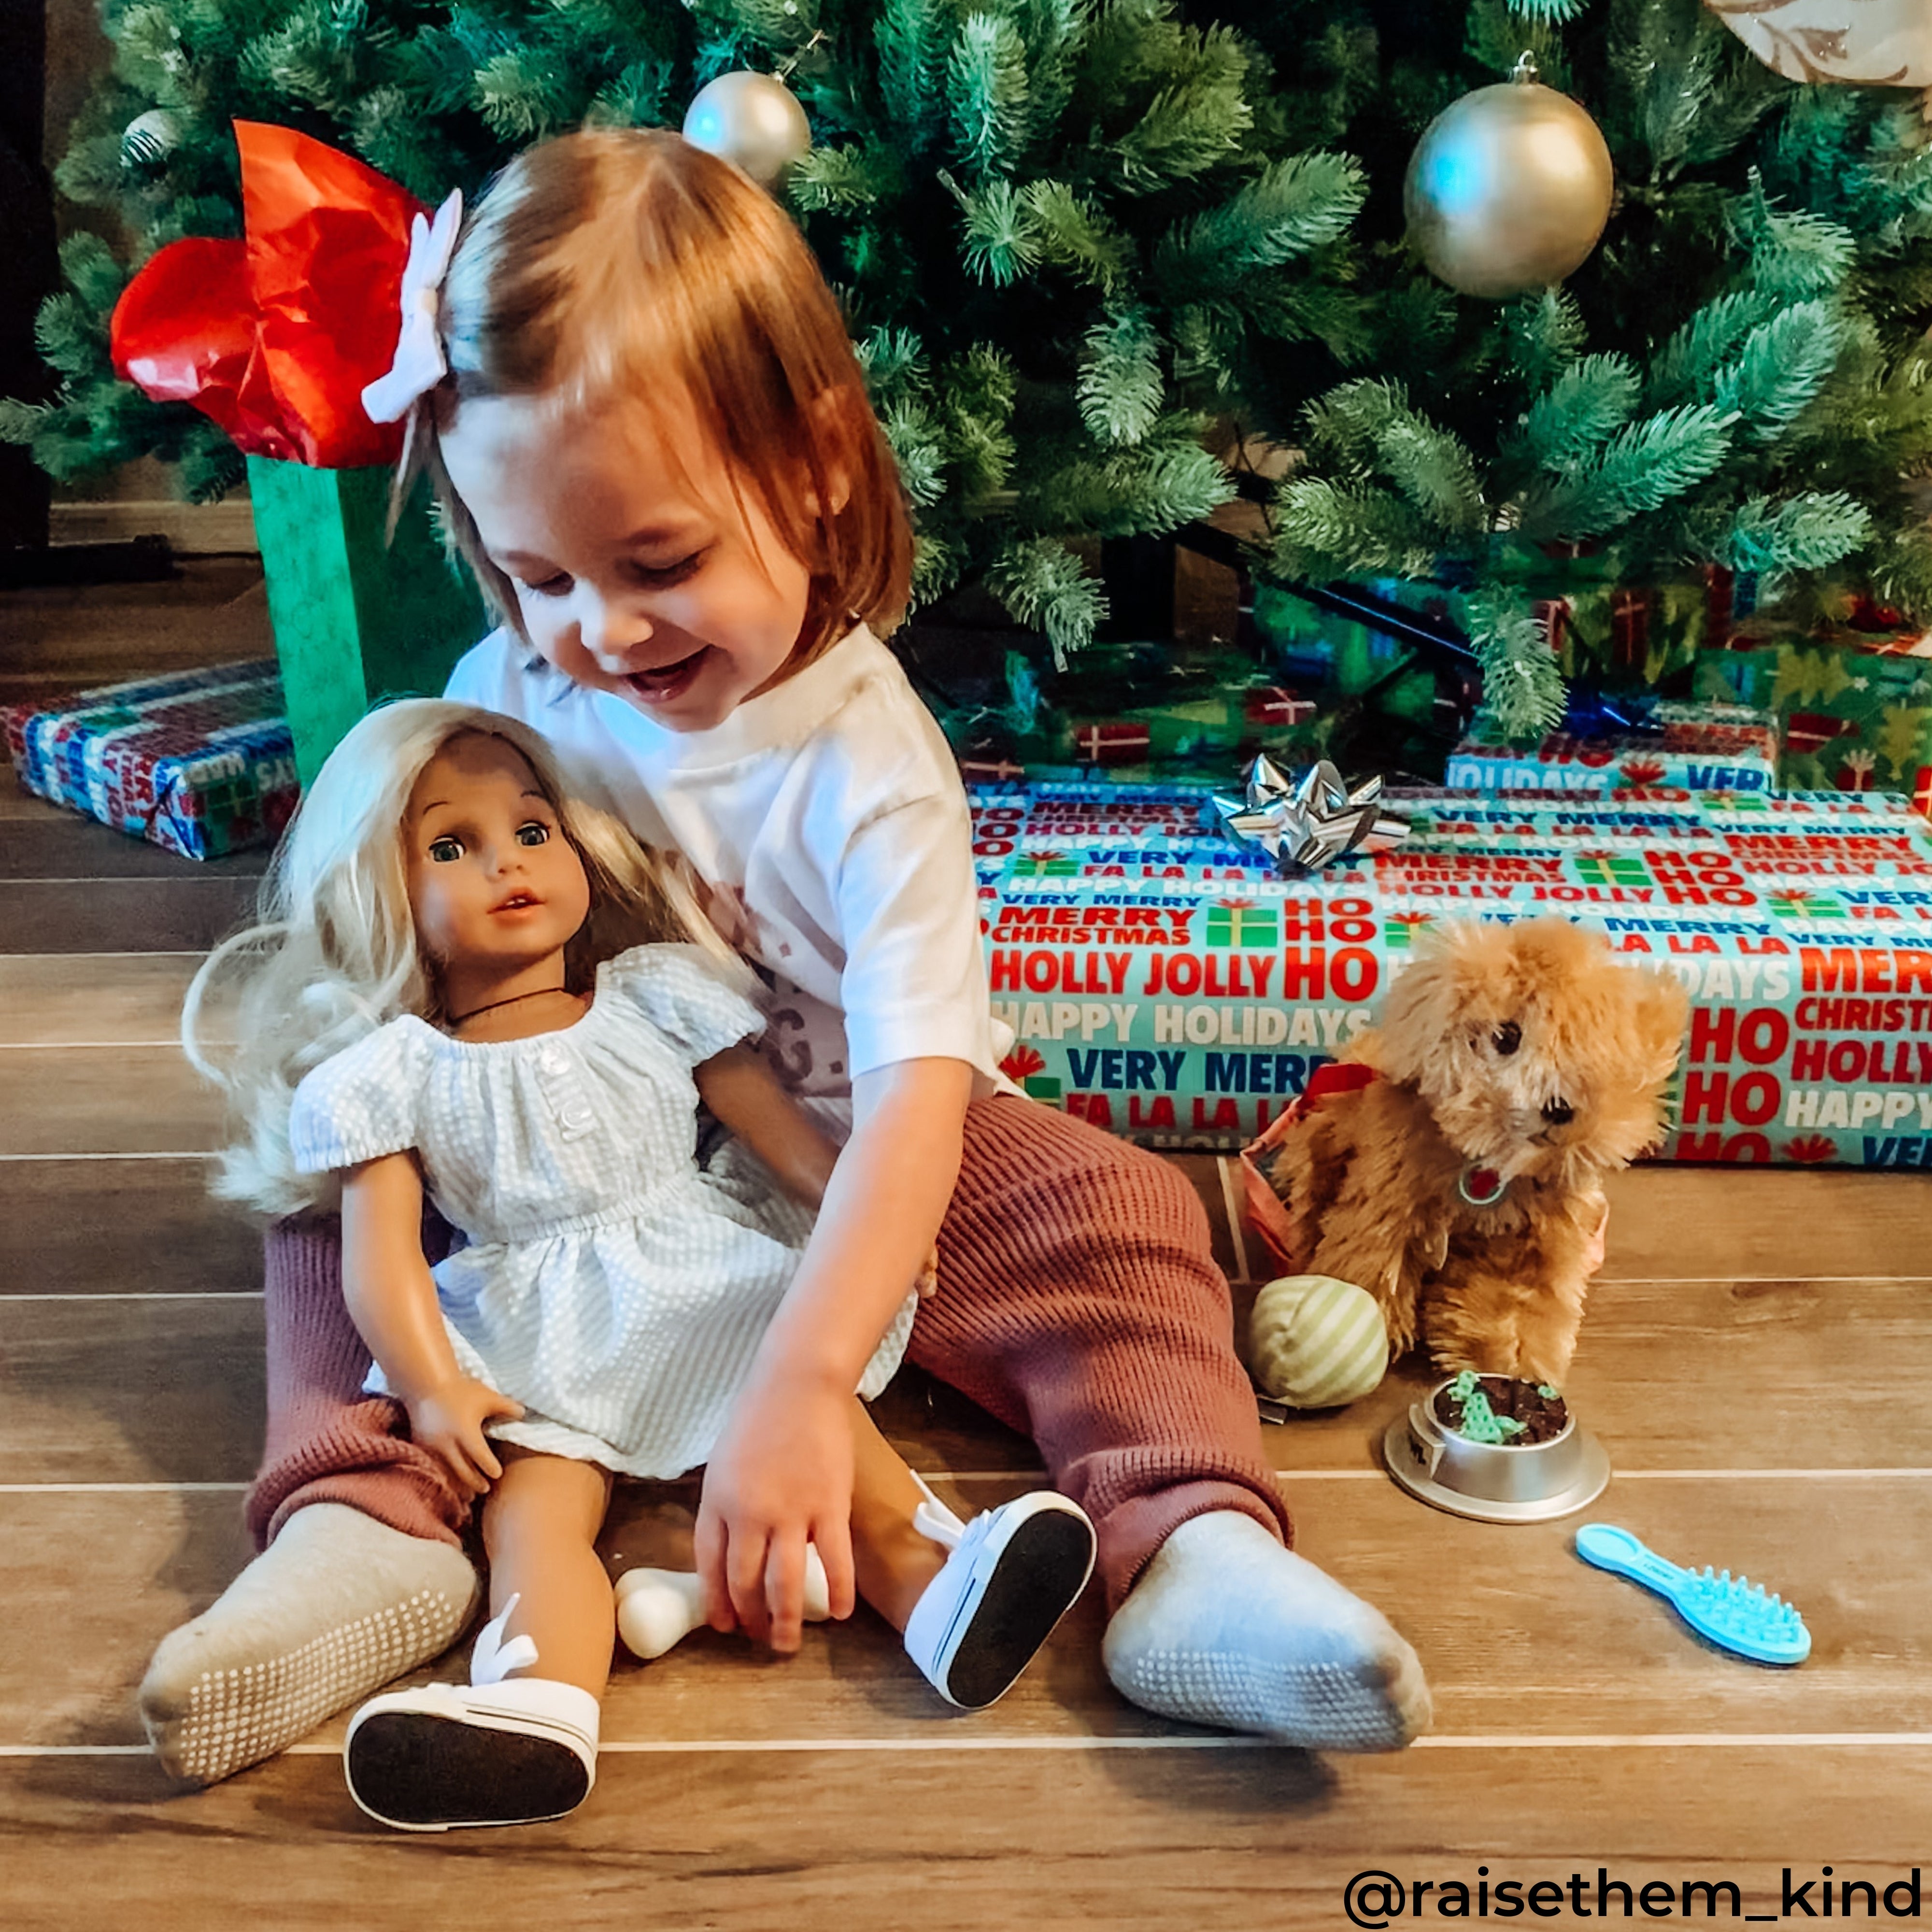 A little girl next to a Christmas tree holding a new doll next to a plush puppy dog.